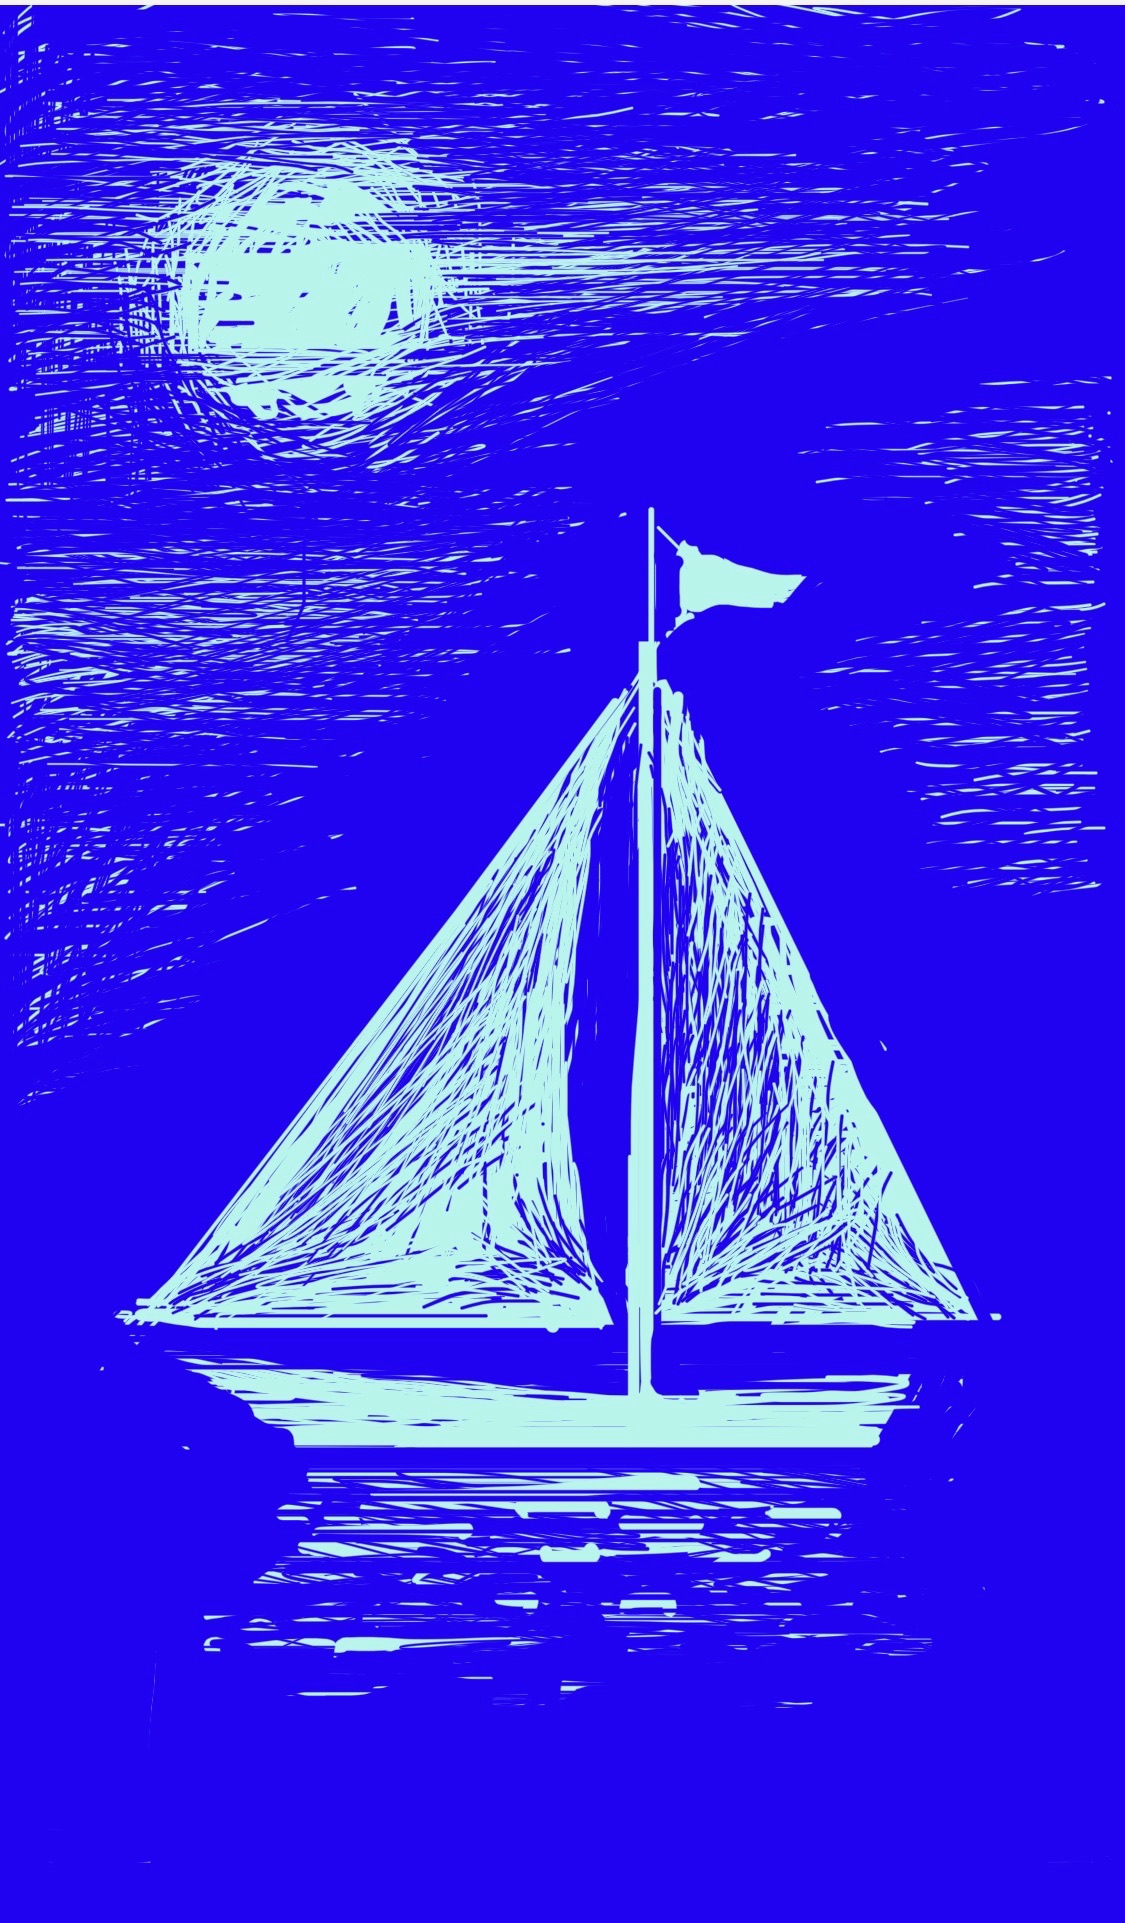 A sailboat on the water at night